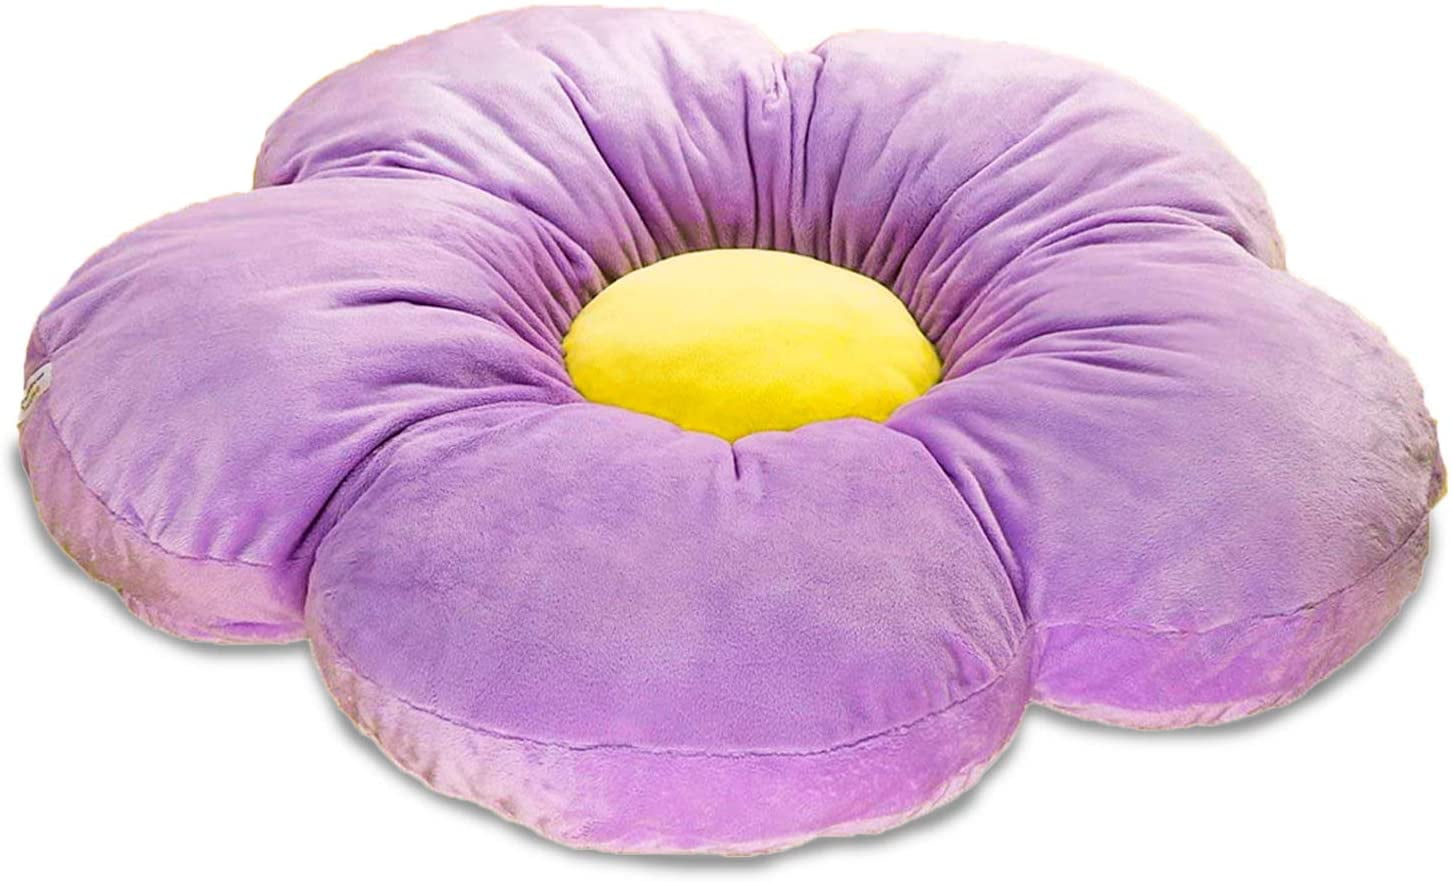 Purple,Large LPFNSF Flower Floor Pillow Seating Cushion Tufted Lounging Pillow Pouf,Daisy Flower Shaped Cute Pillow for Kids Reading Watching TV Bed Indoor and Outdoor Decoration 